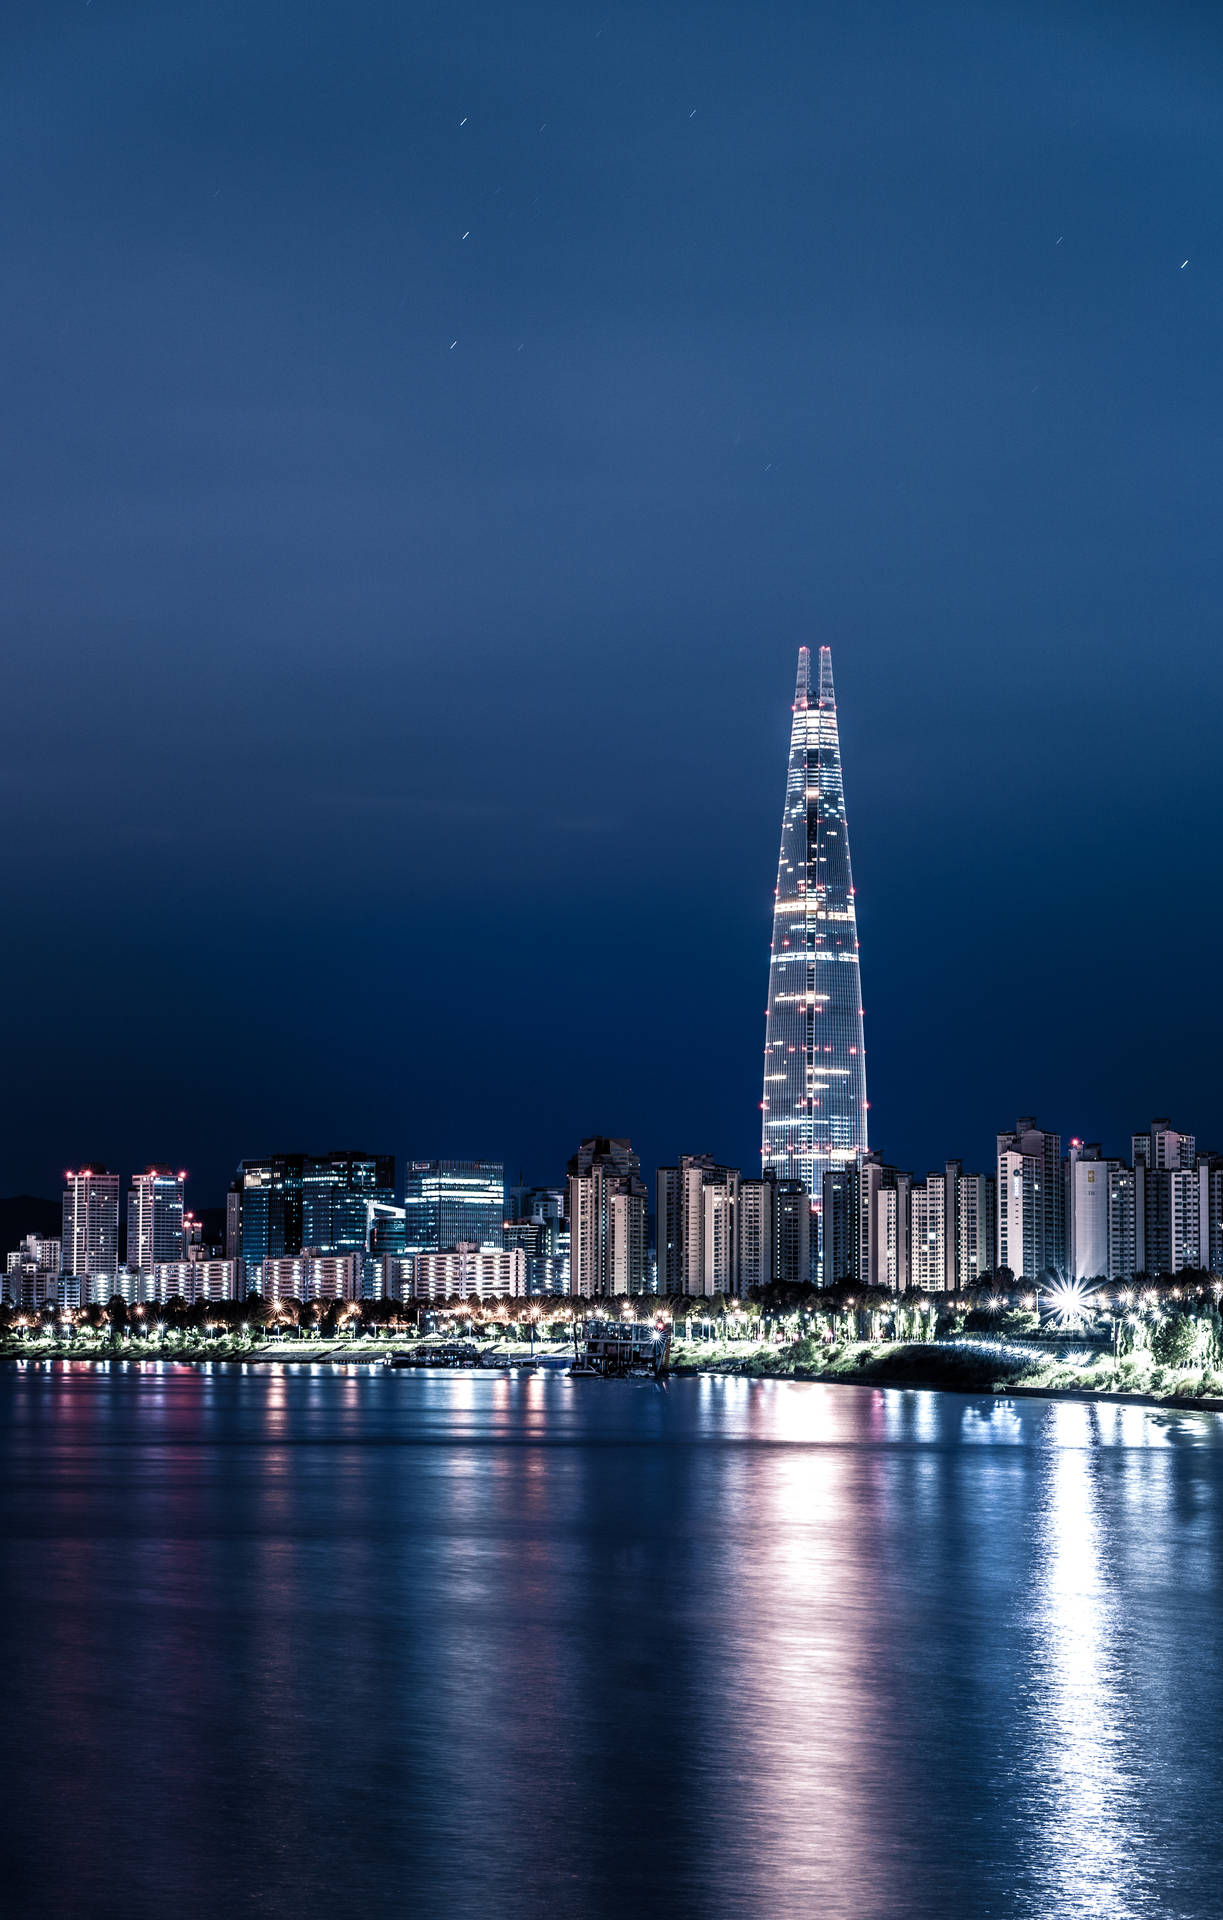 Seoul Lotte Tower Background